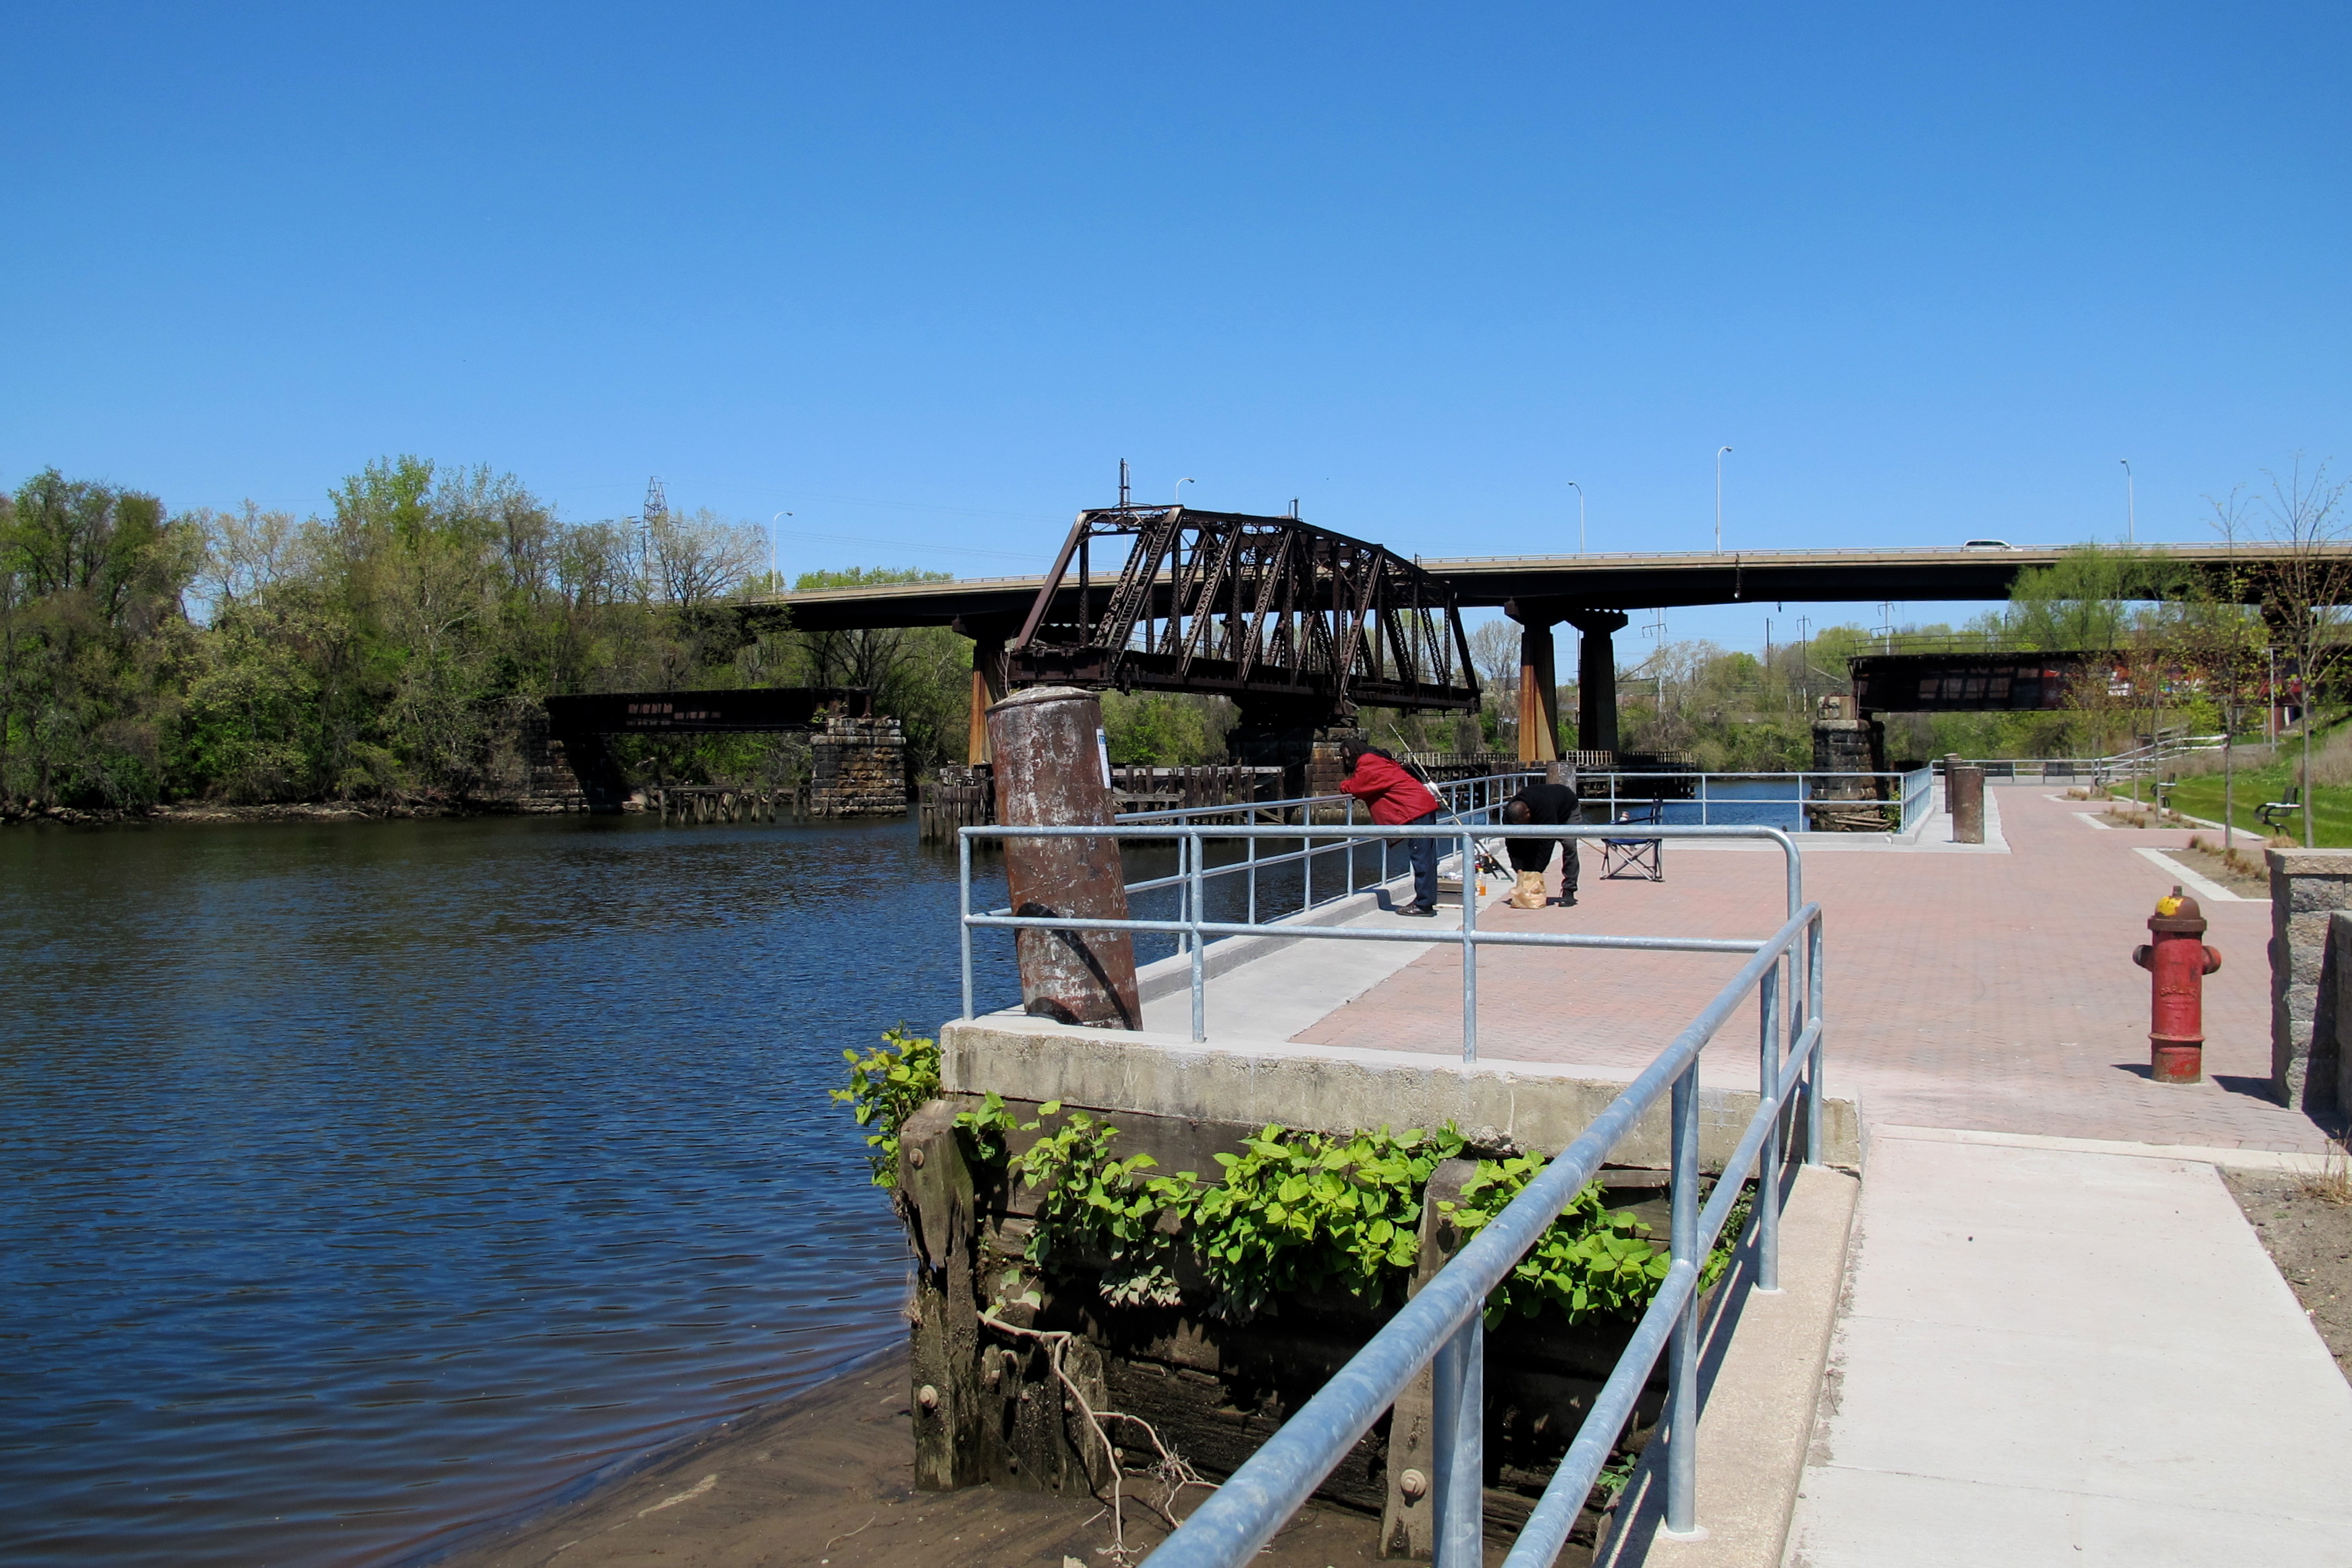 (Will the swing bridge next to the Gray's Ferry bridge be reused to connect Gray's Ferry Crescent with Bartram's Mile?)